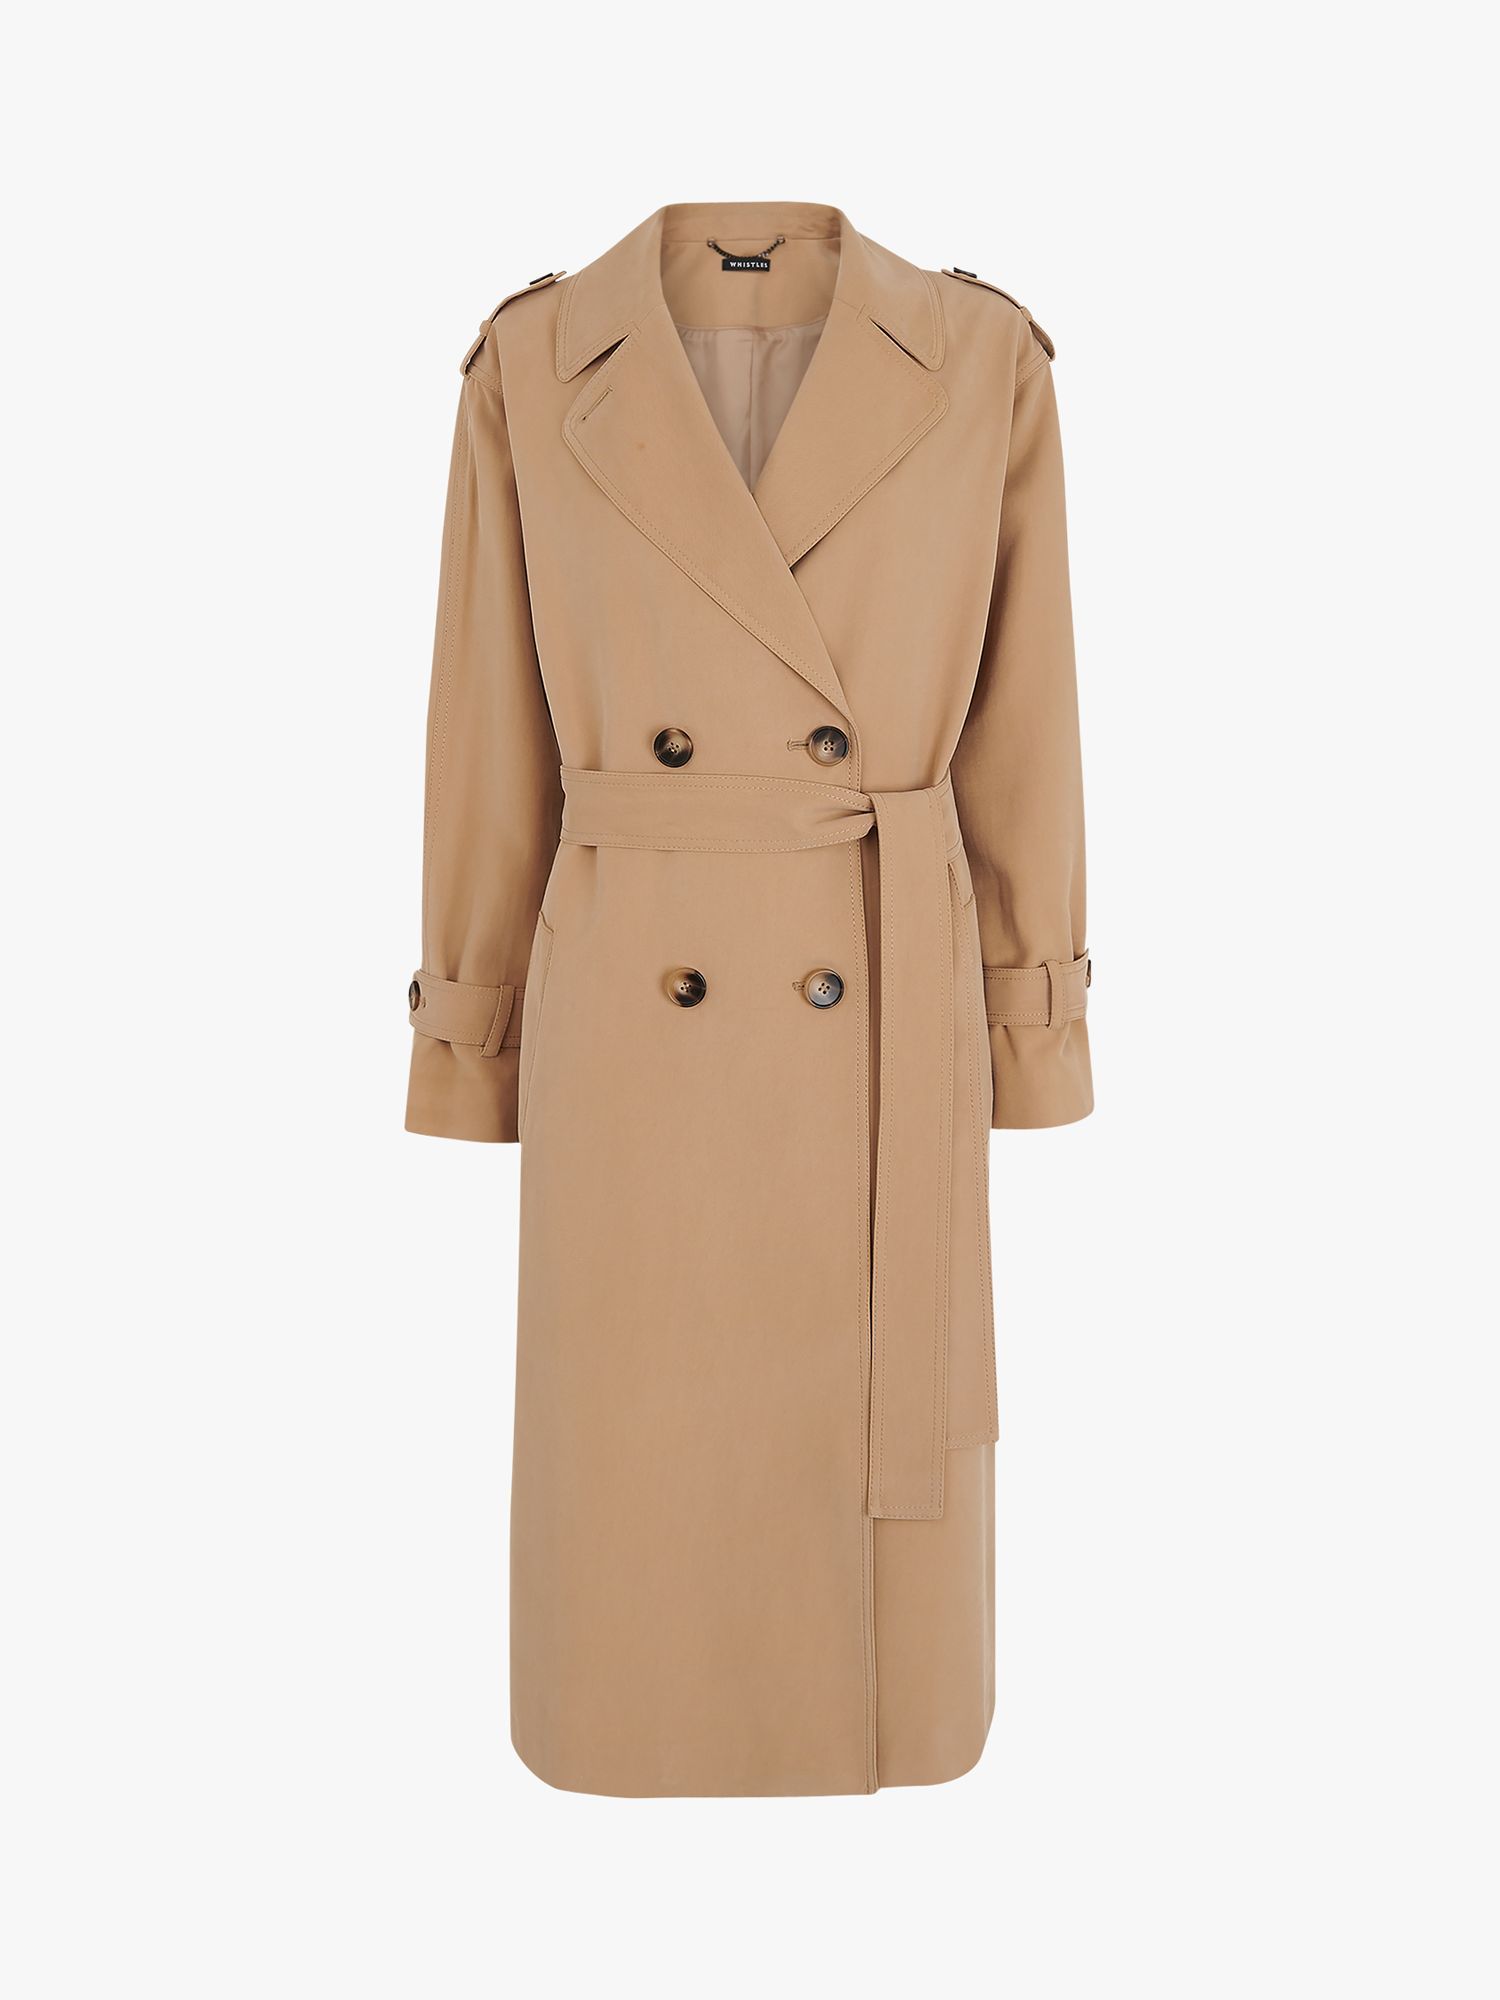 27 Classic Trench Coats For Women 